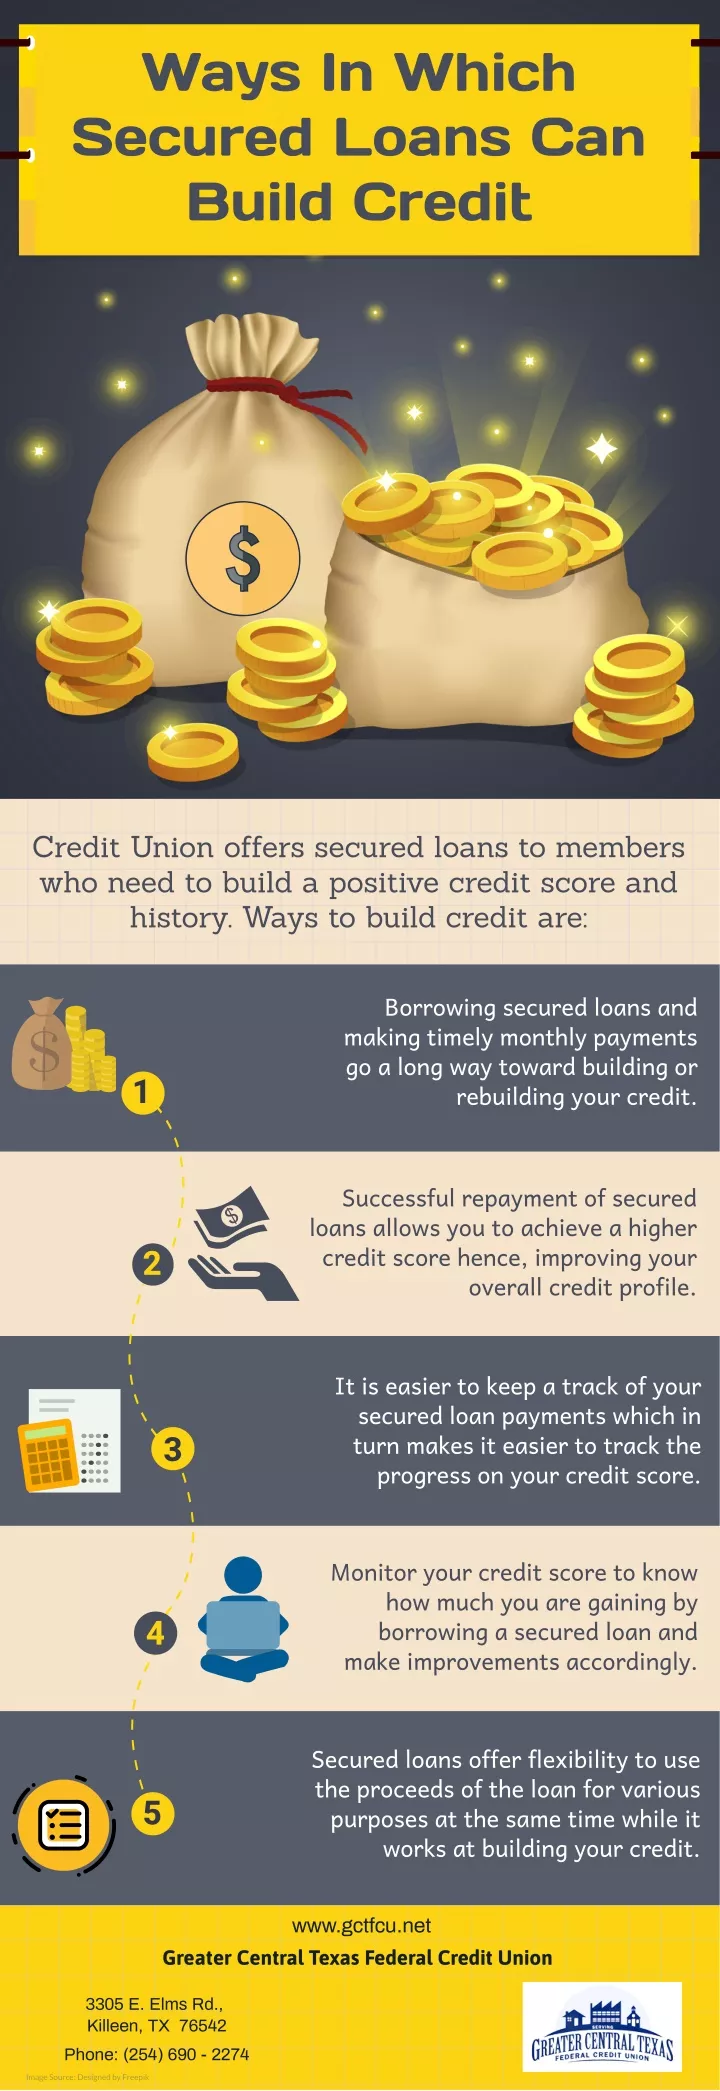 ways in which secured loans can build credit